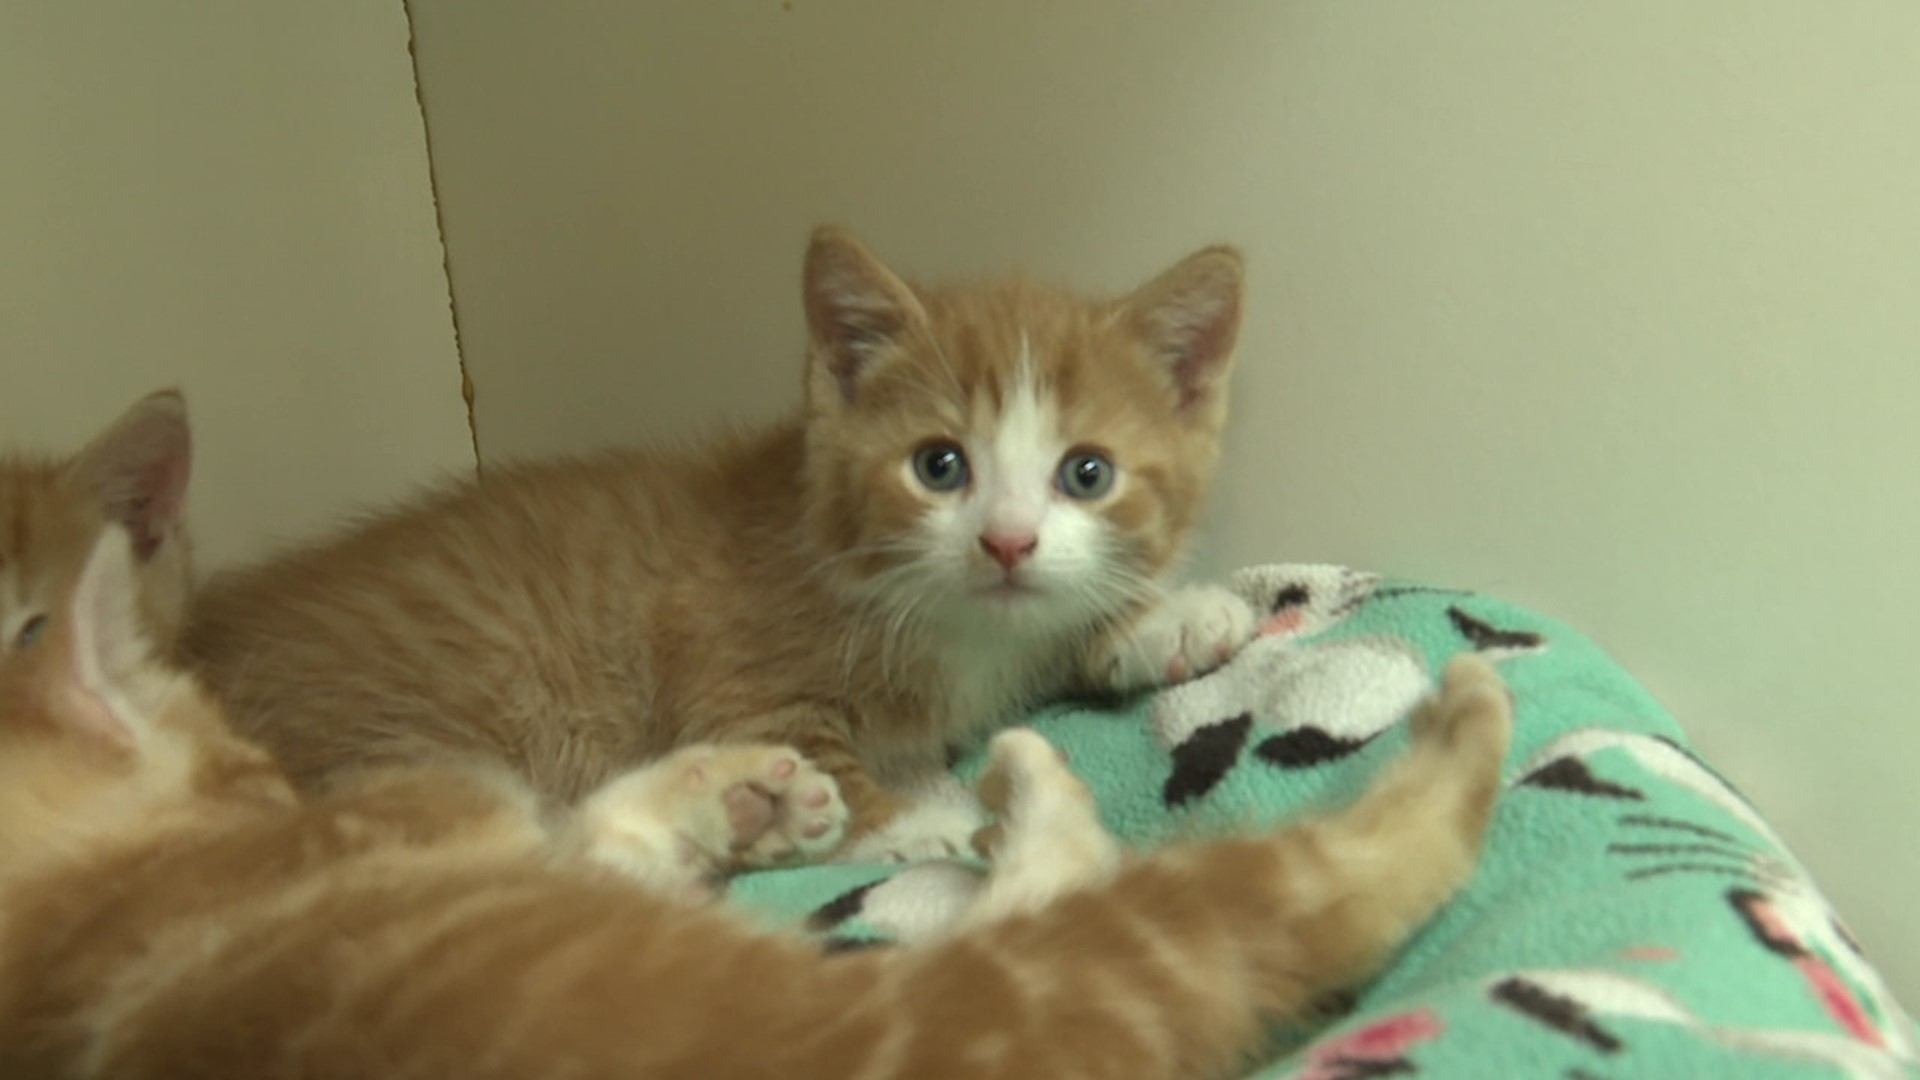 Kitten season might sound cute, but it puts a lot of stress on workers at animal shelters.